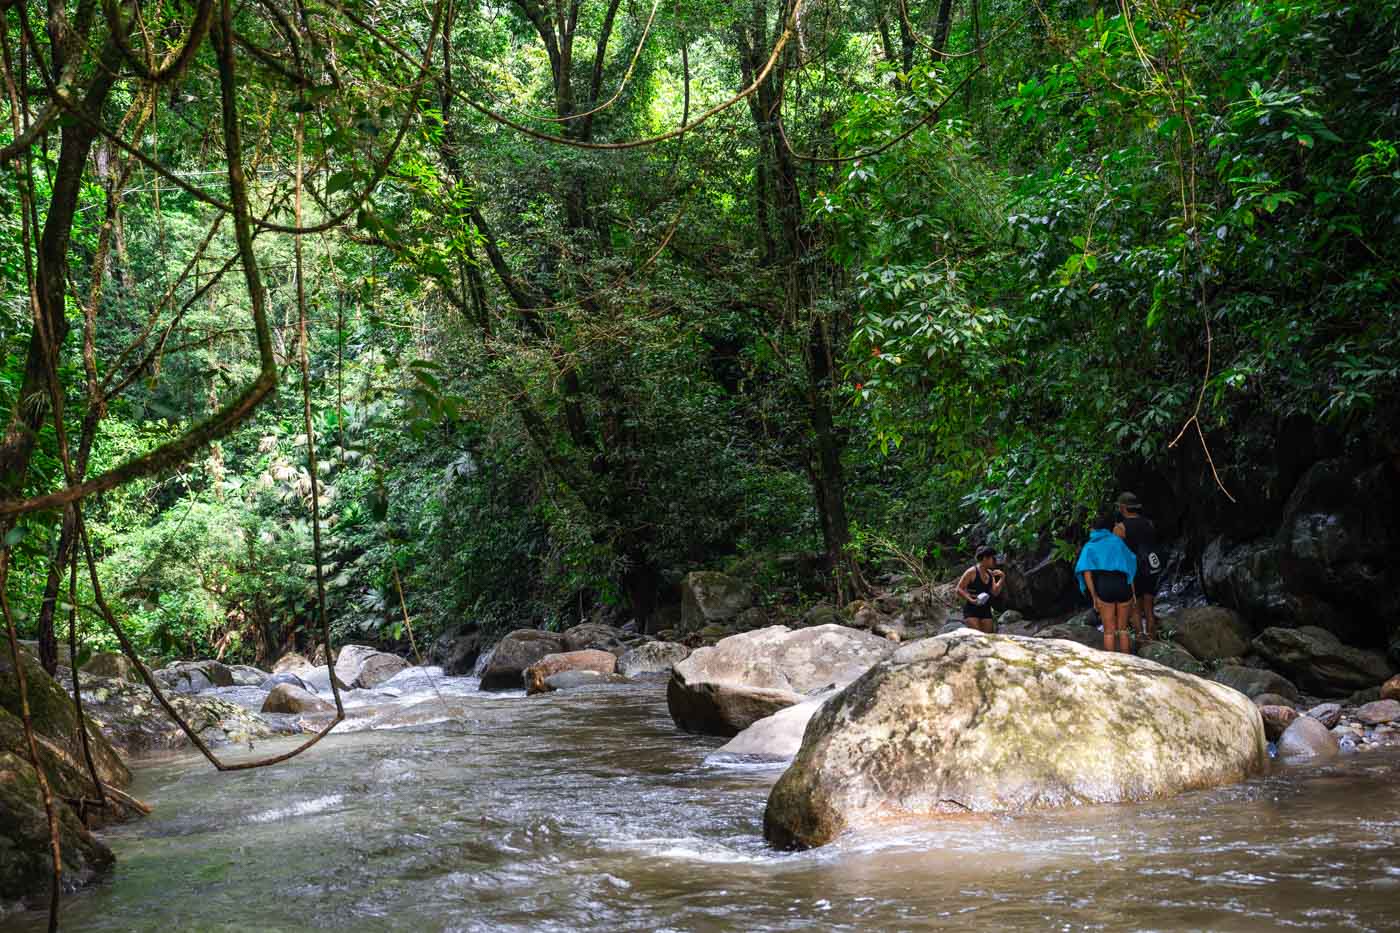 A group of tourists standing beside a river in the forests of Minca.